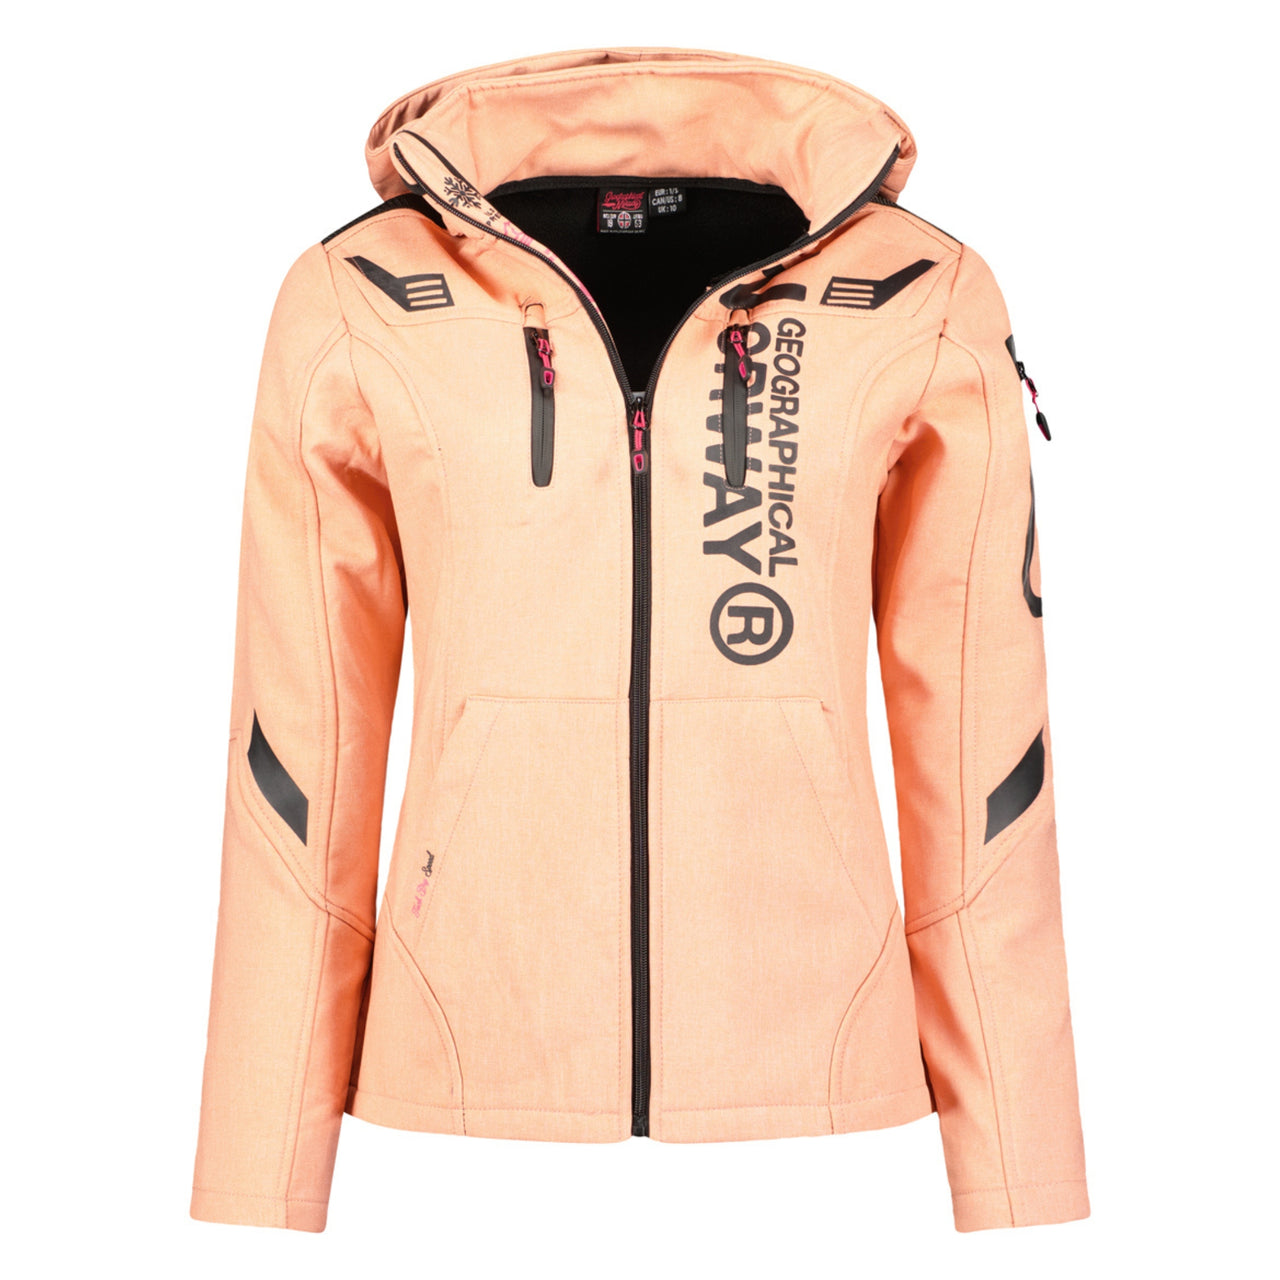 Geographical Norway Truffe Softshell Mujer con capucha desmontable Coral